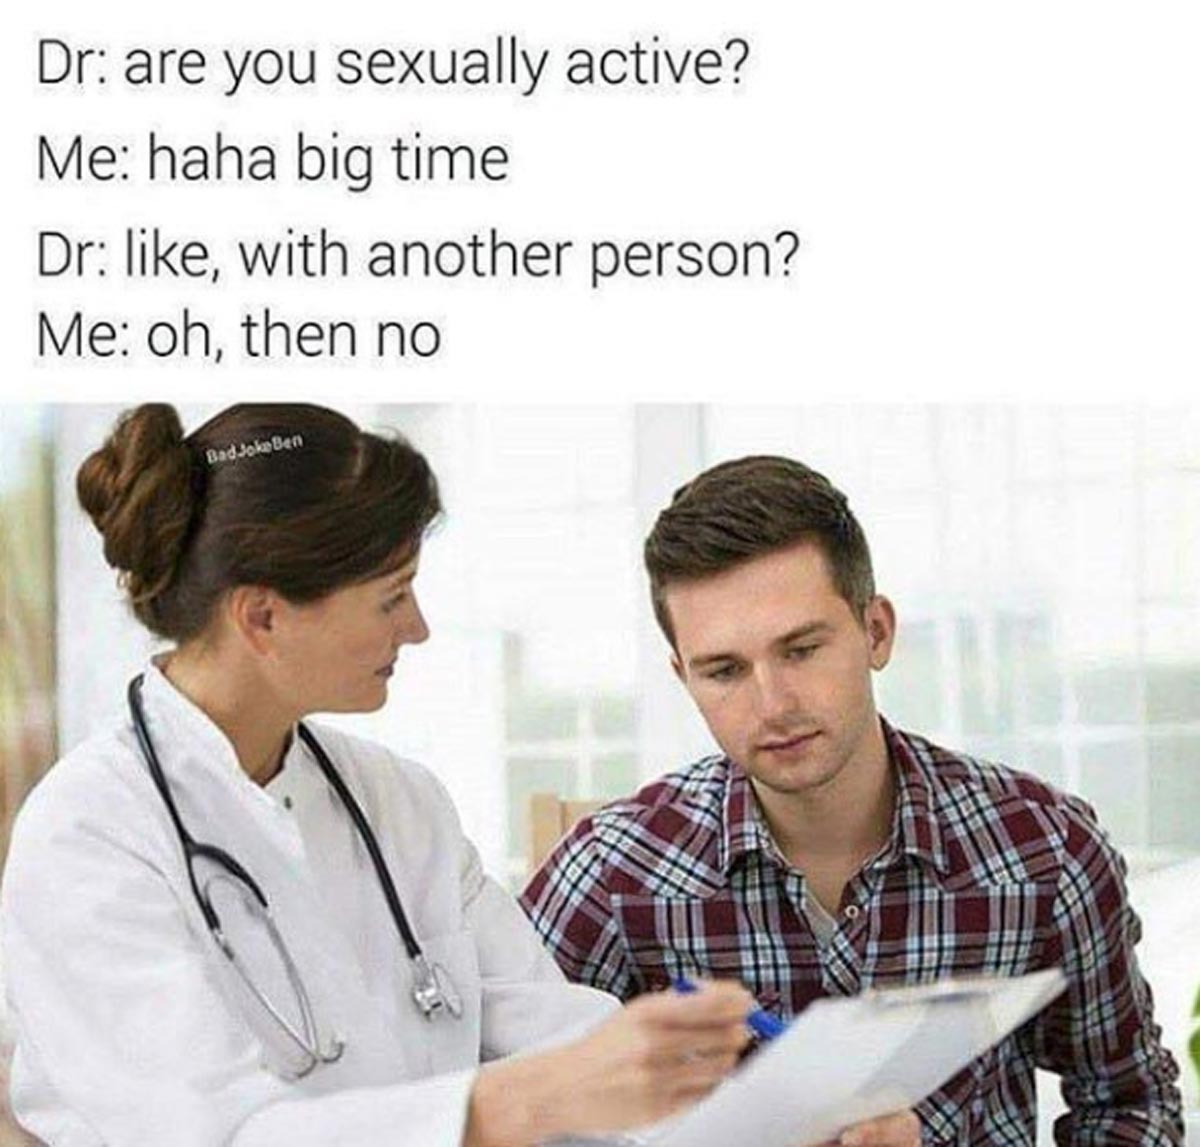 funny sex memes - sexually inappropriate memes - Dr are you sexually active? Me haha big time Dr , with another person? Me oh, then no Bad JokaBen